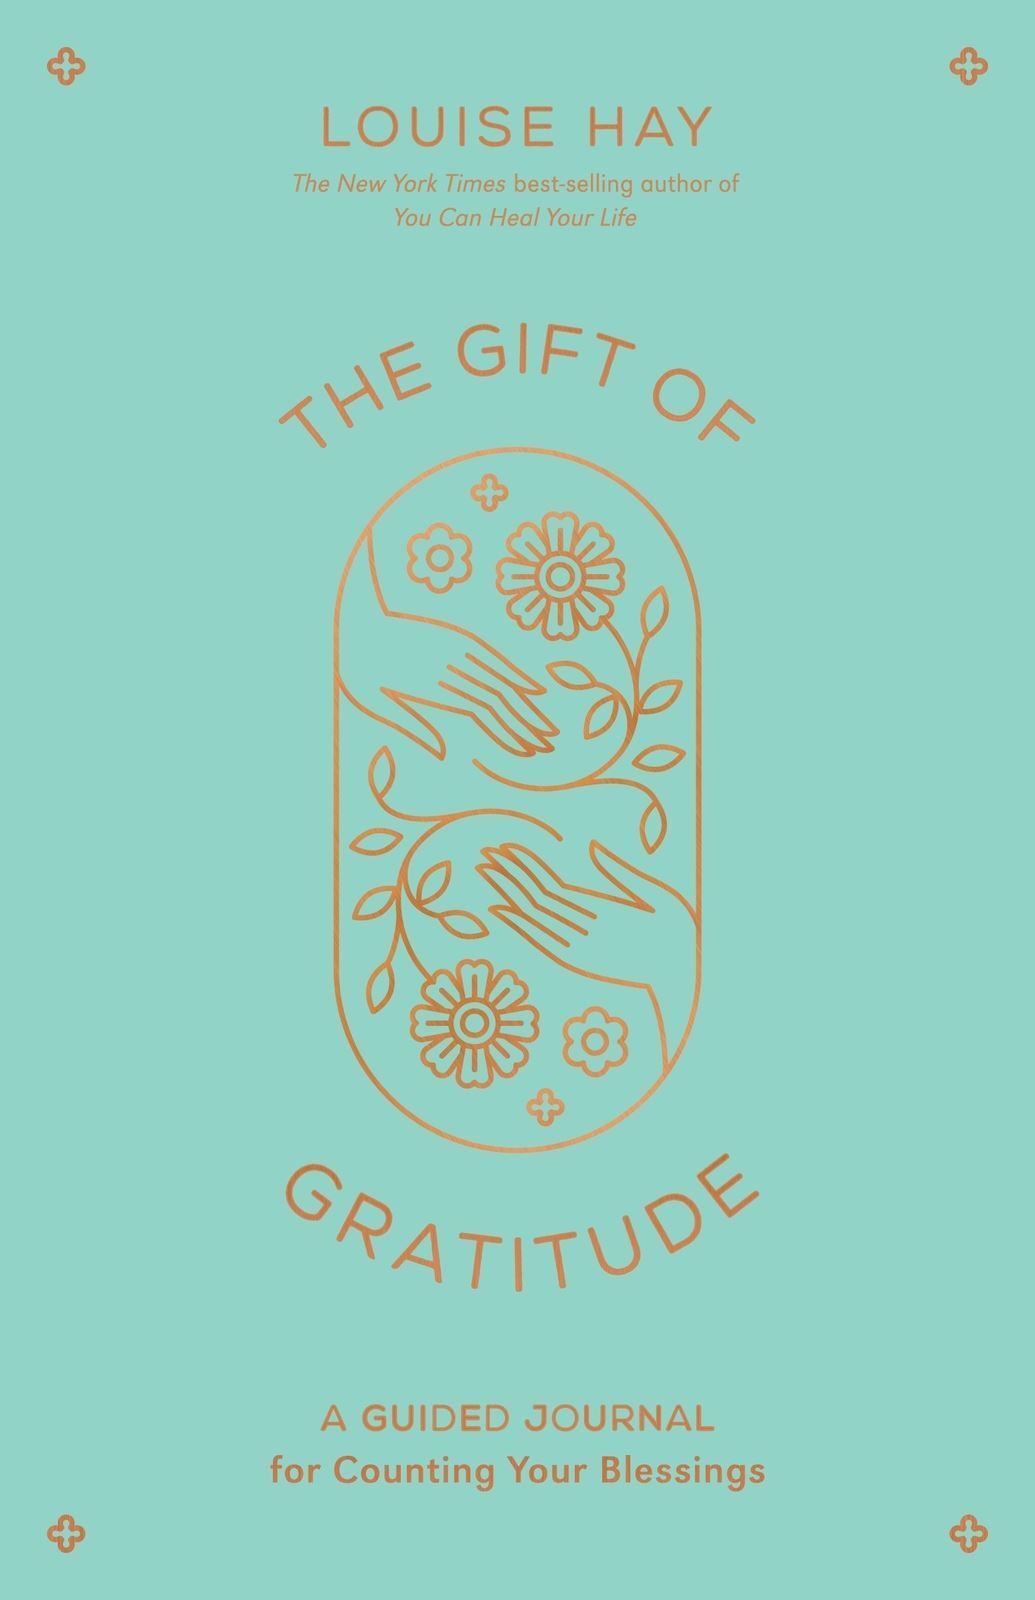 The Gift of Gratitude: A Guided Journal | Louise Hay